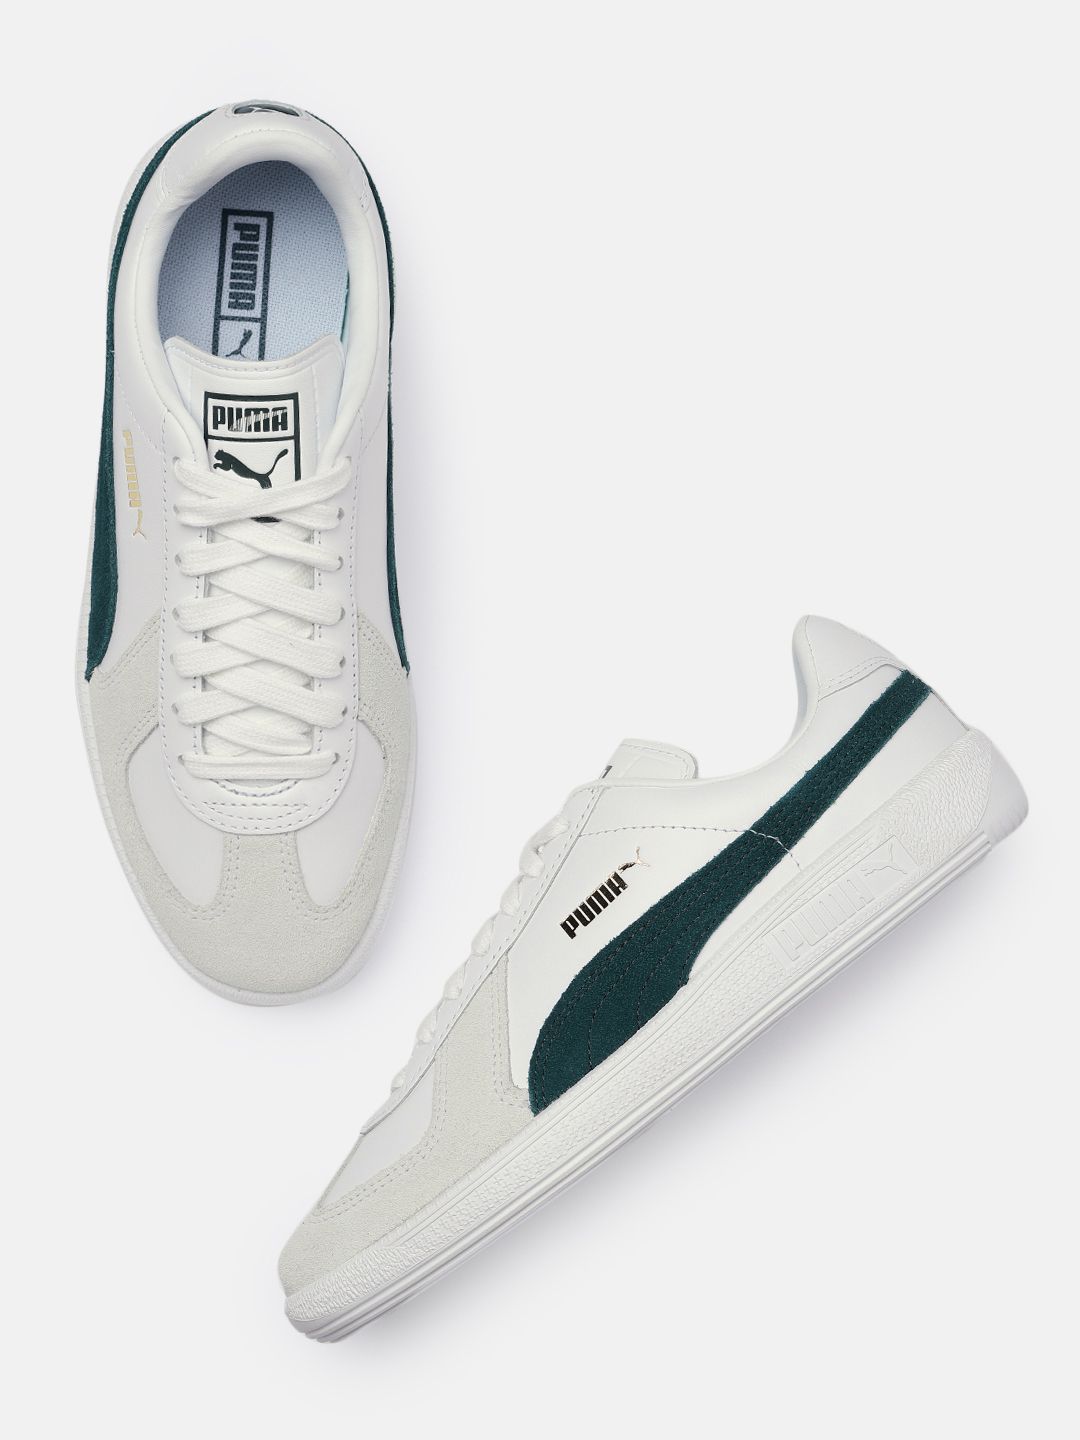 Puma Unisex White Army Trainer Leather Sneakers Price in India